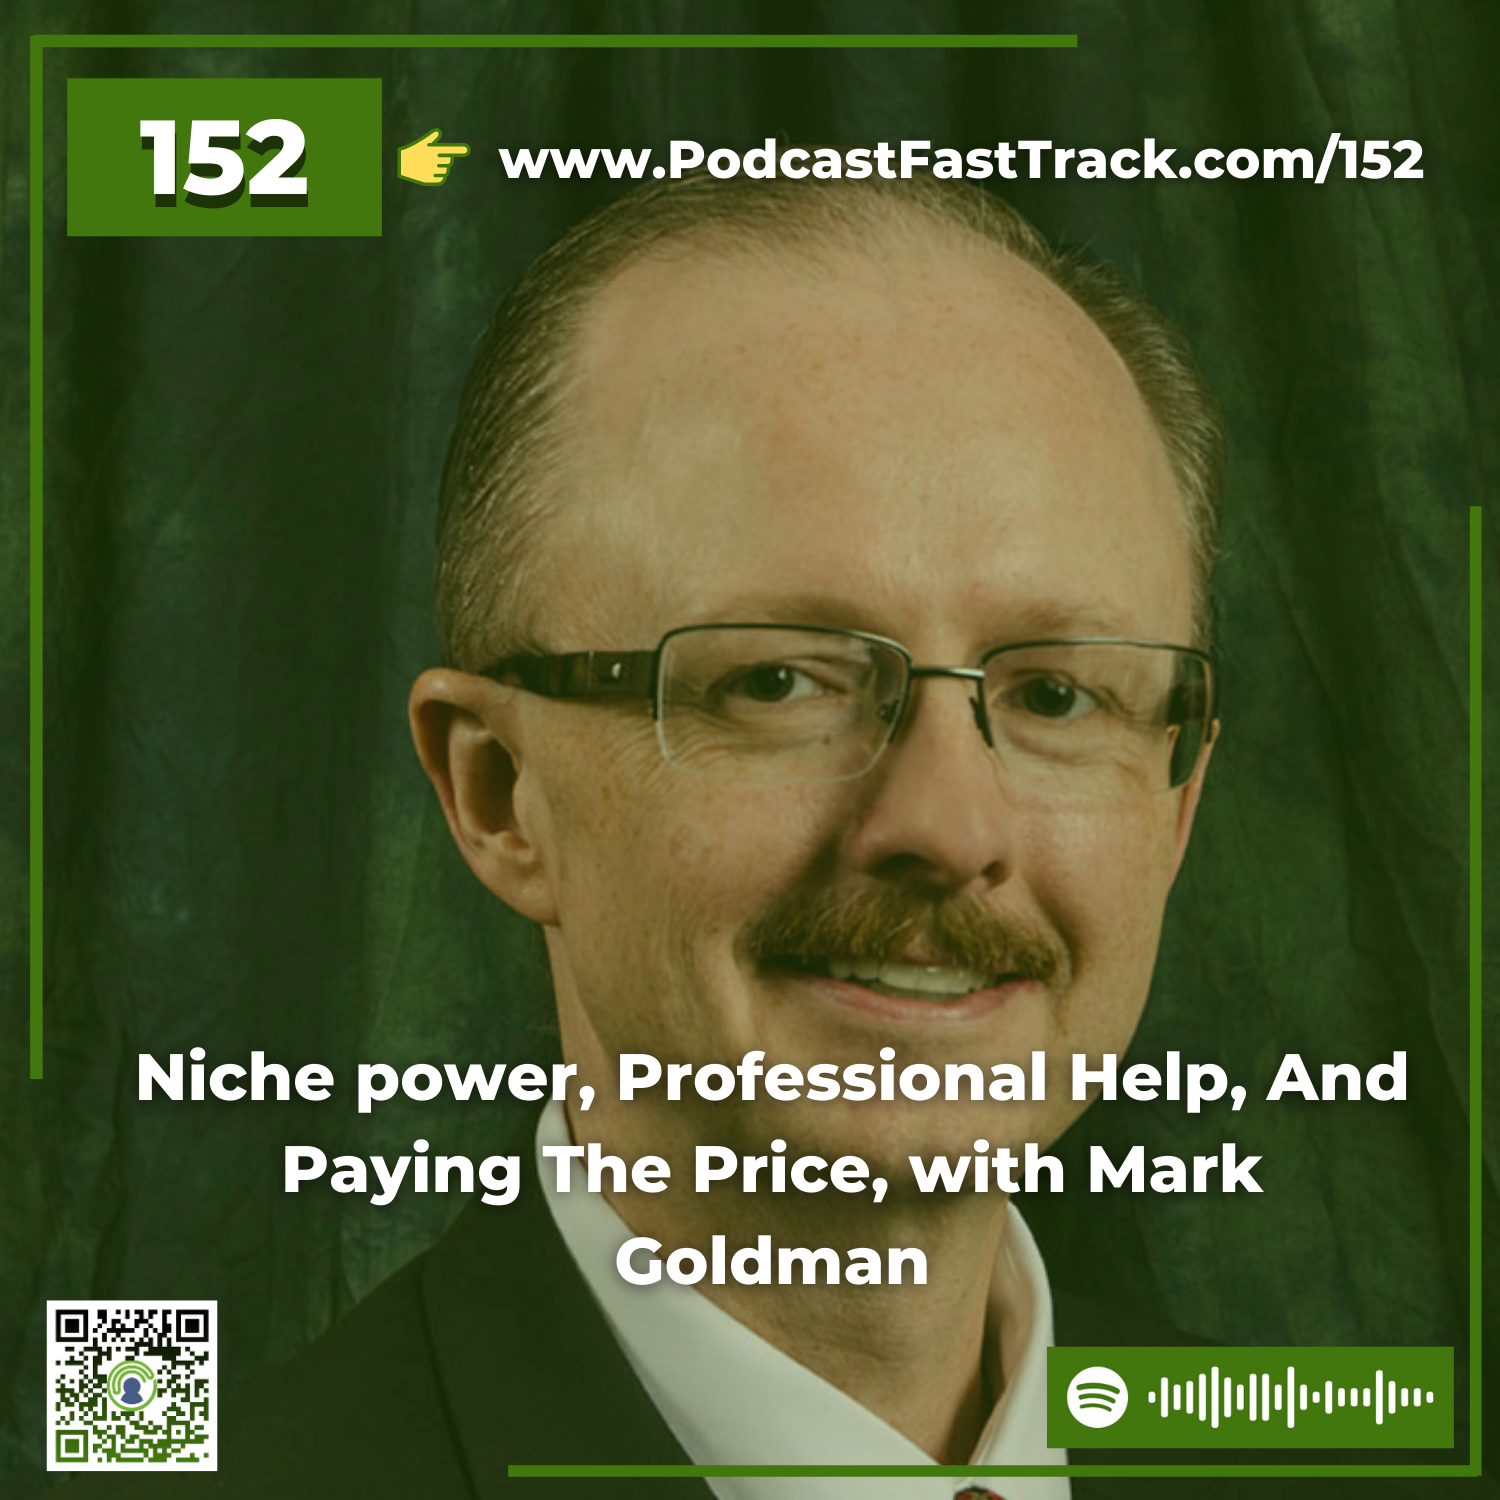 152: Niche power, Professional Help, And Paying The Price, with Mark Goldman